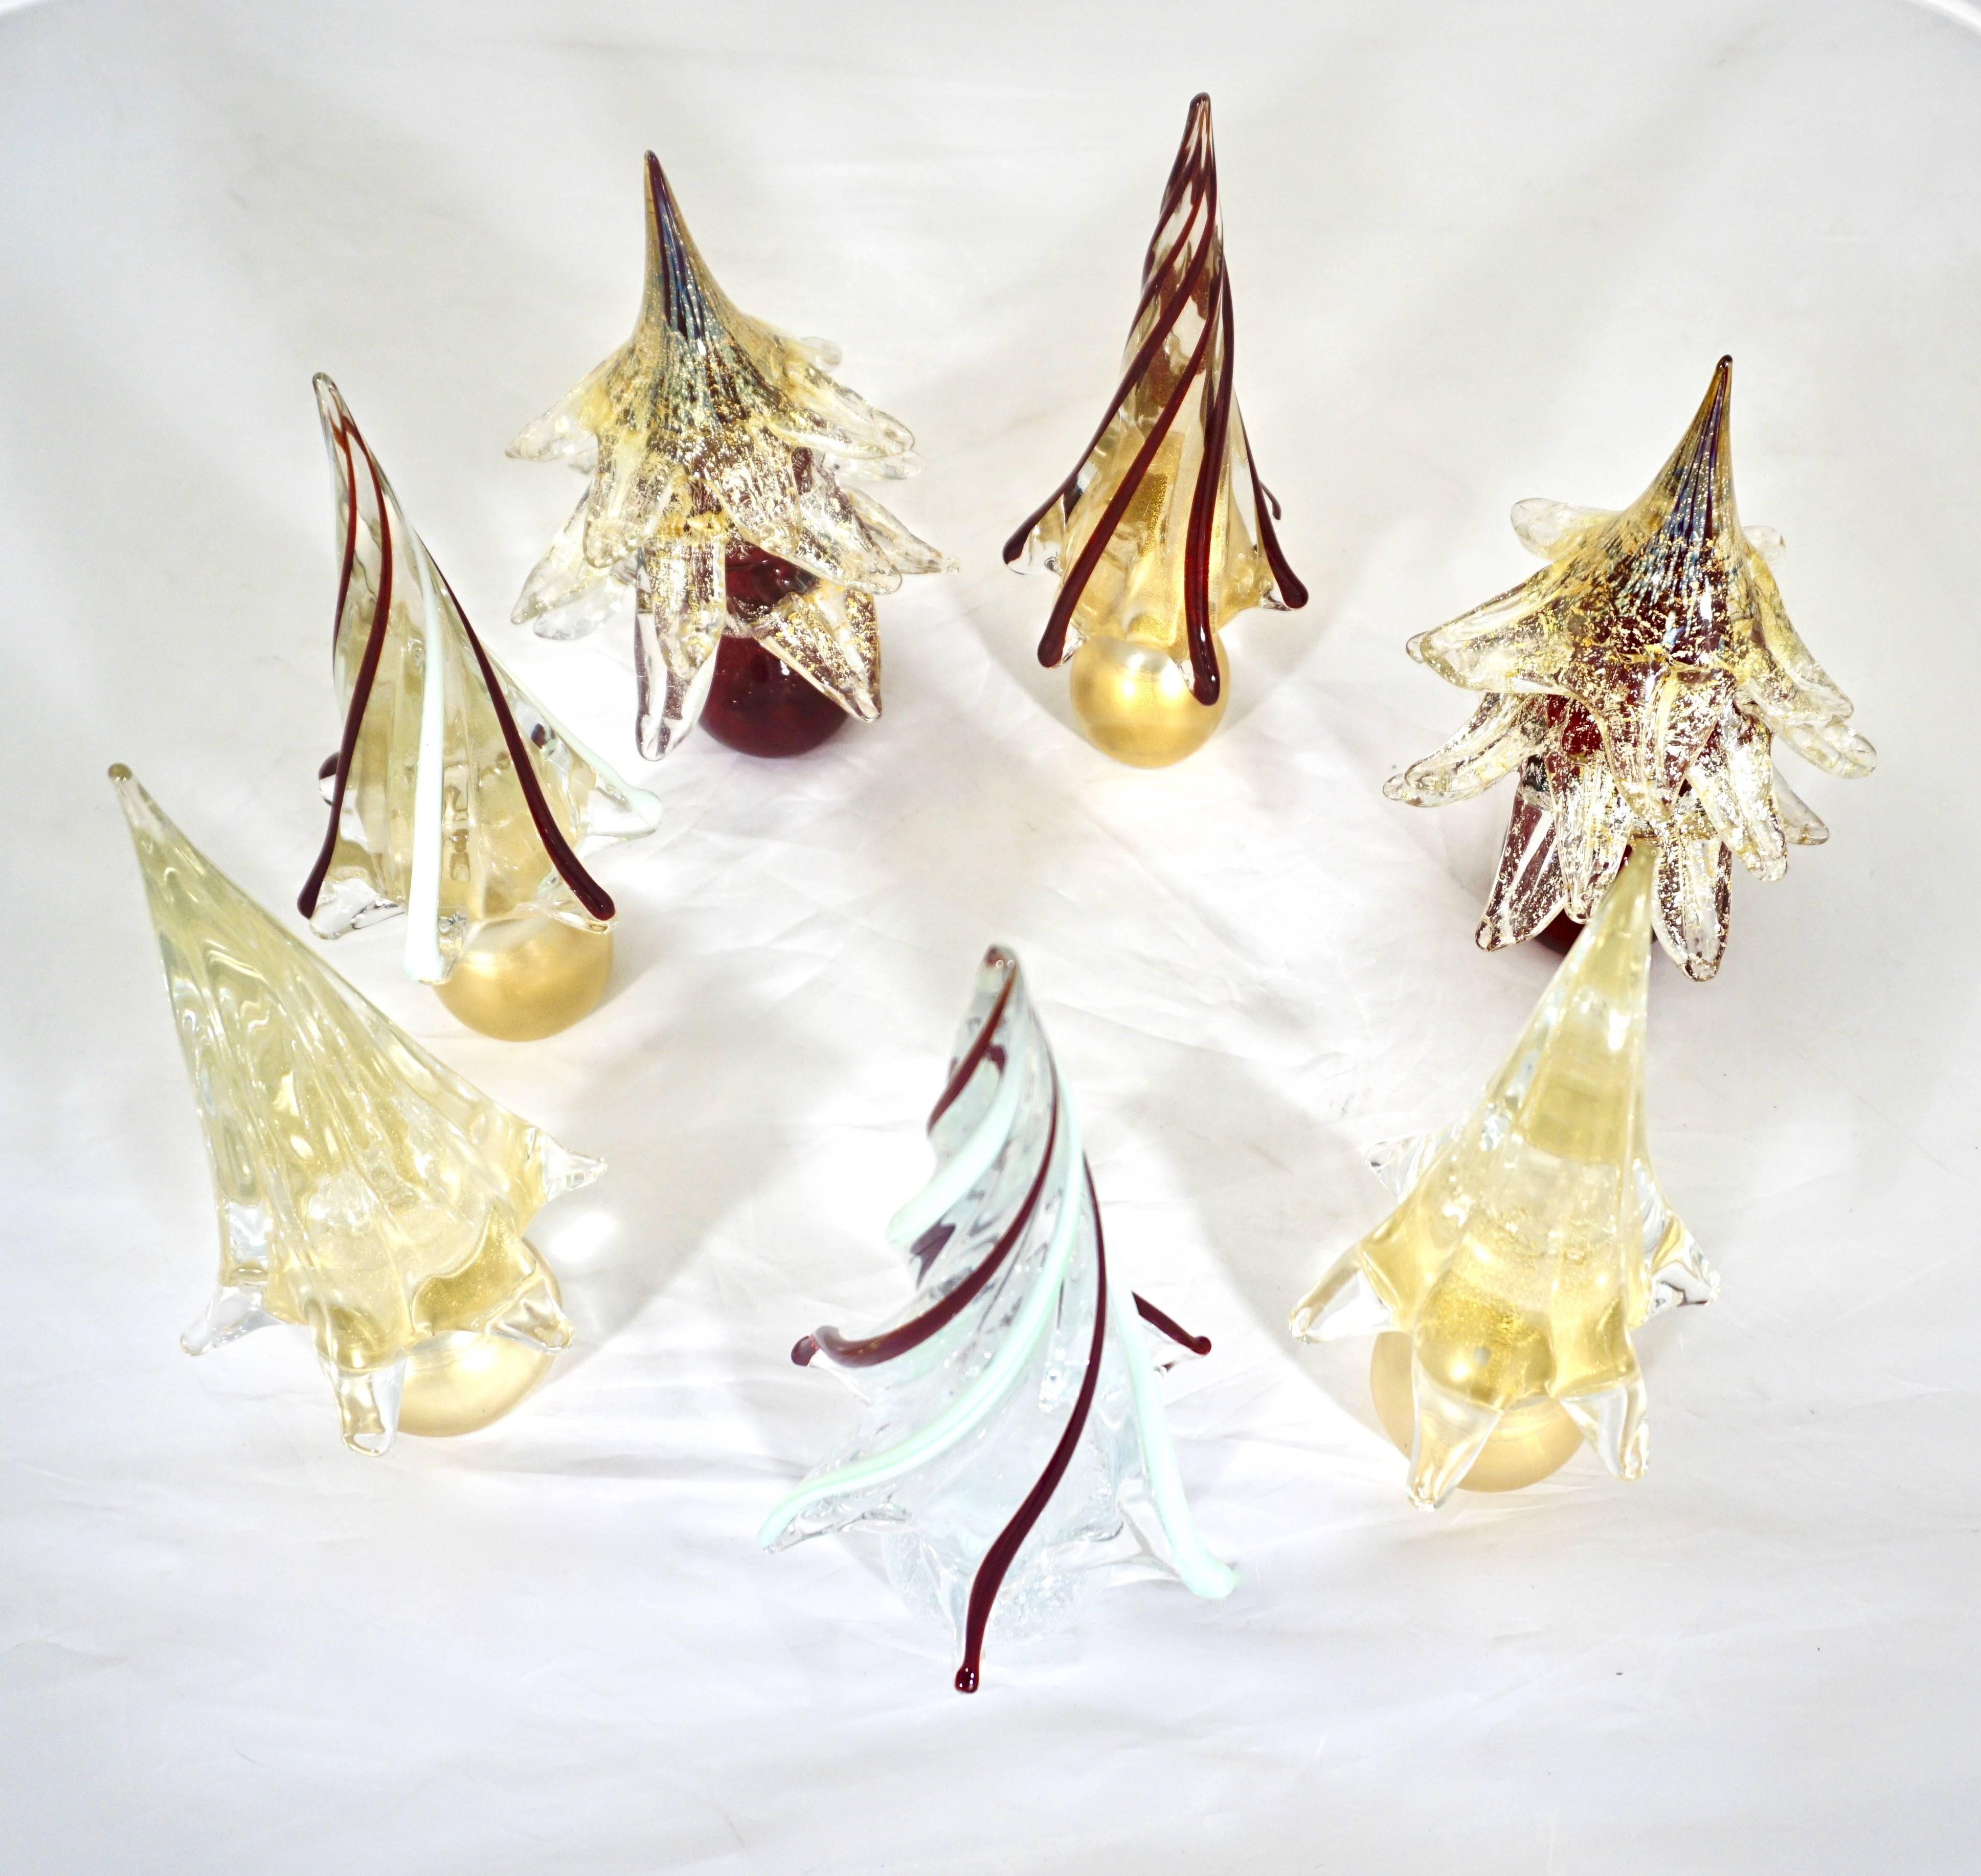 These Murano glass trees of organic sleek modern design, a vintage creation by the Venetian company Formia, signed pieces, are each individually mouth blown and handcrafted. Each is made precious by the use of extensive pure 24-karat gold and